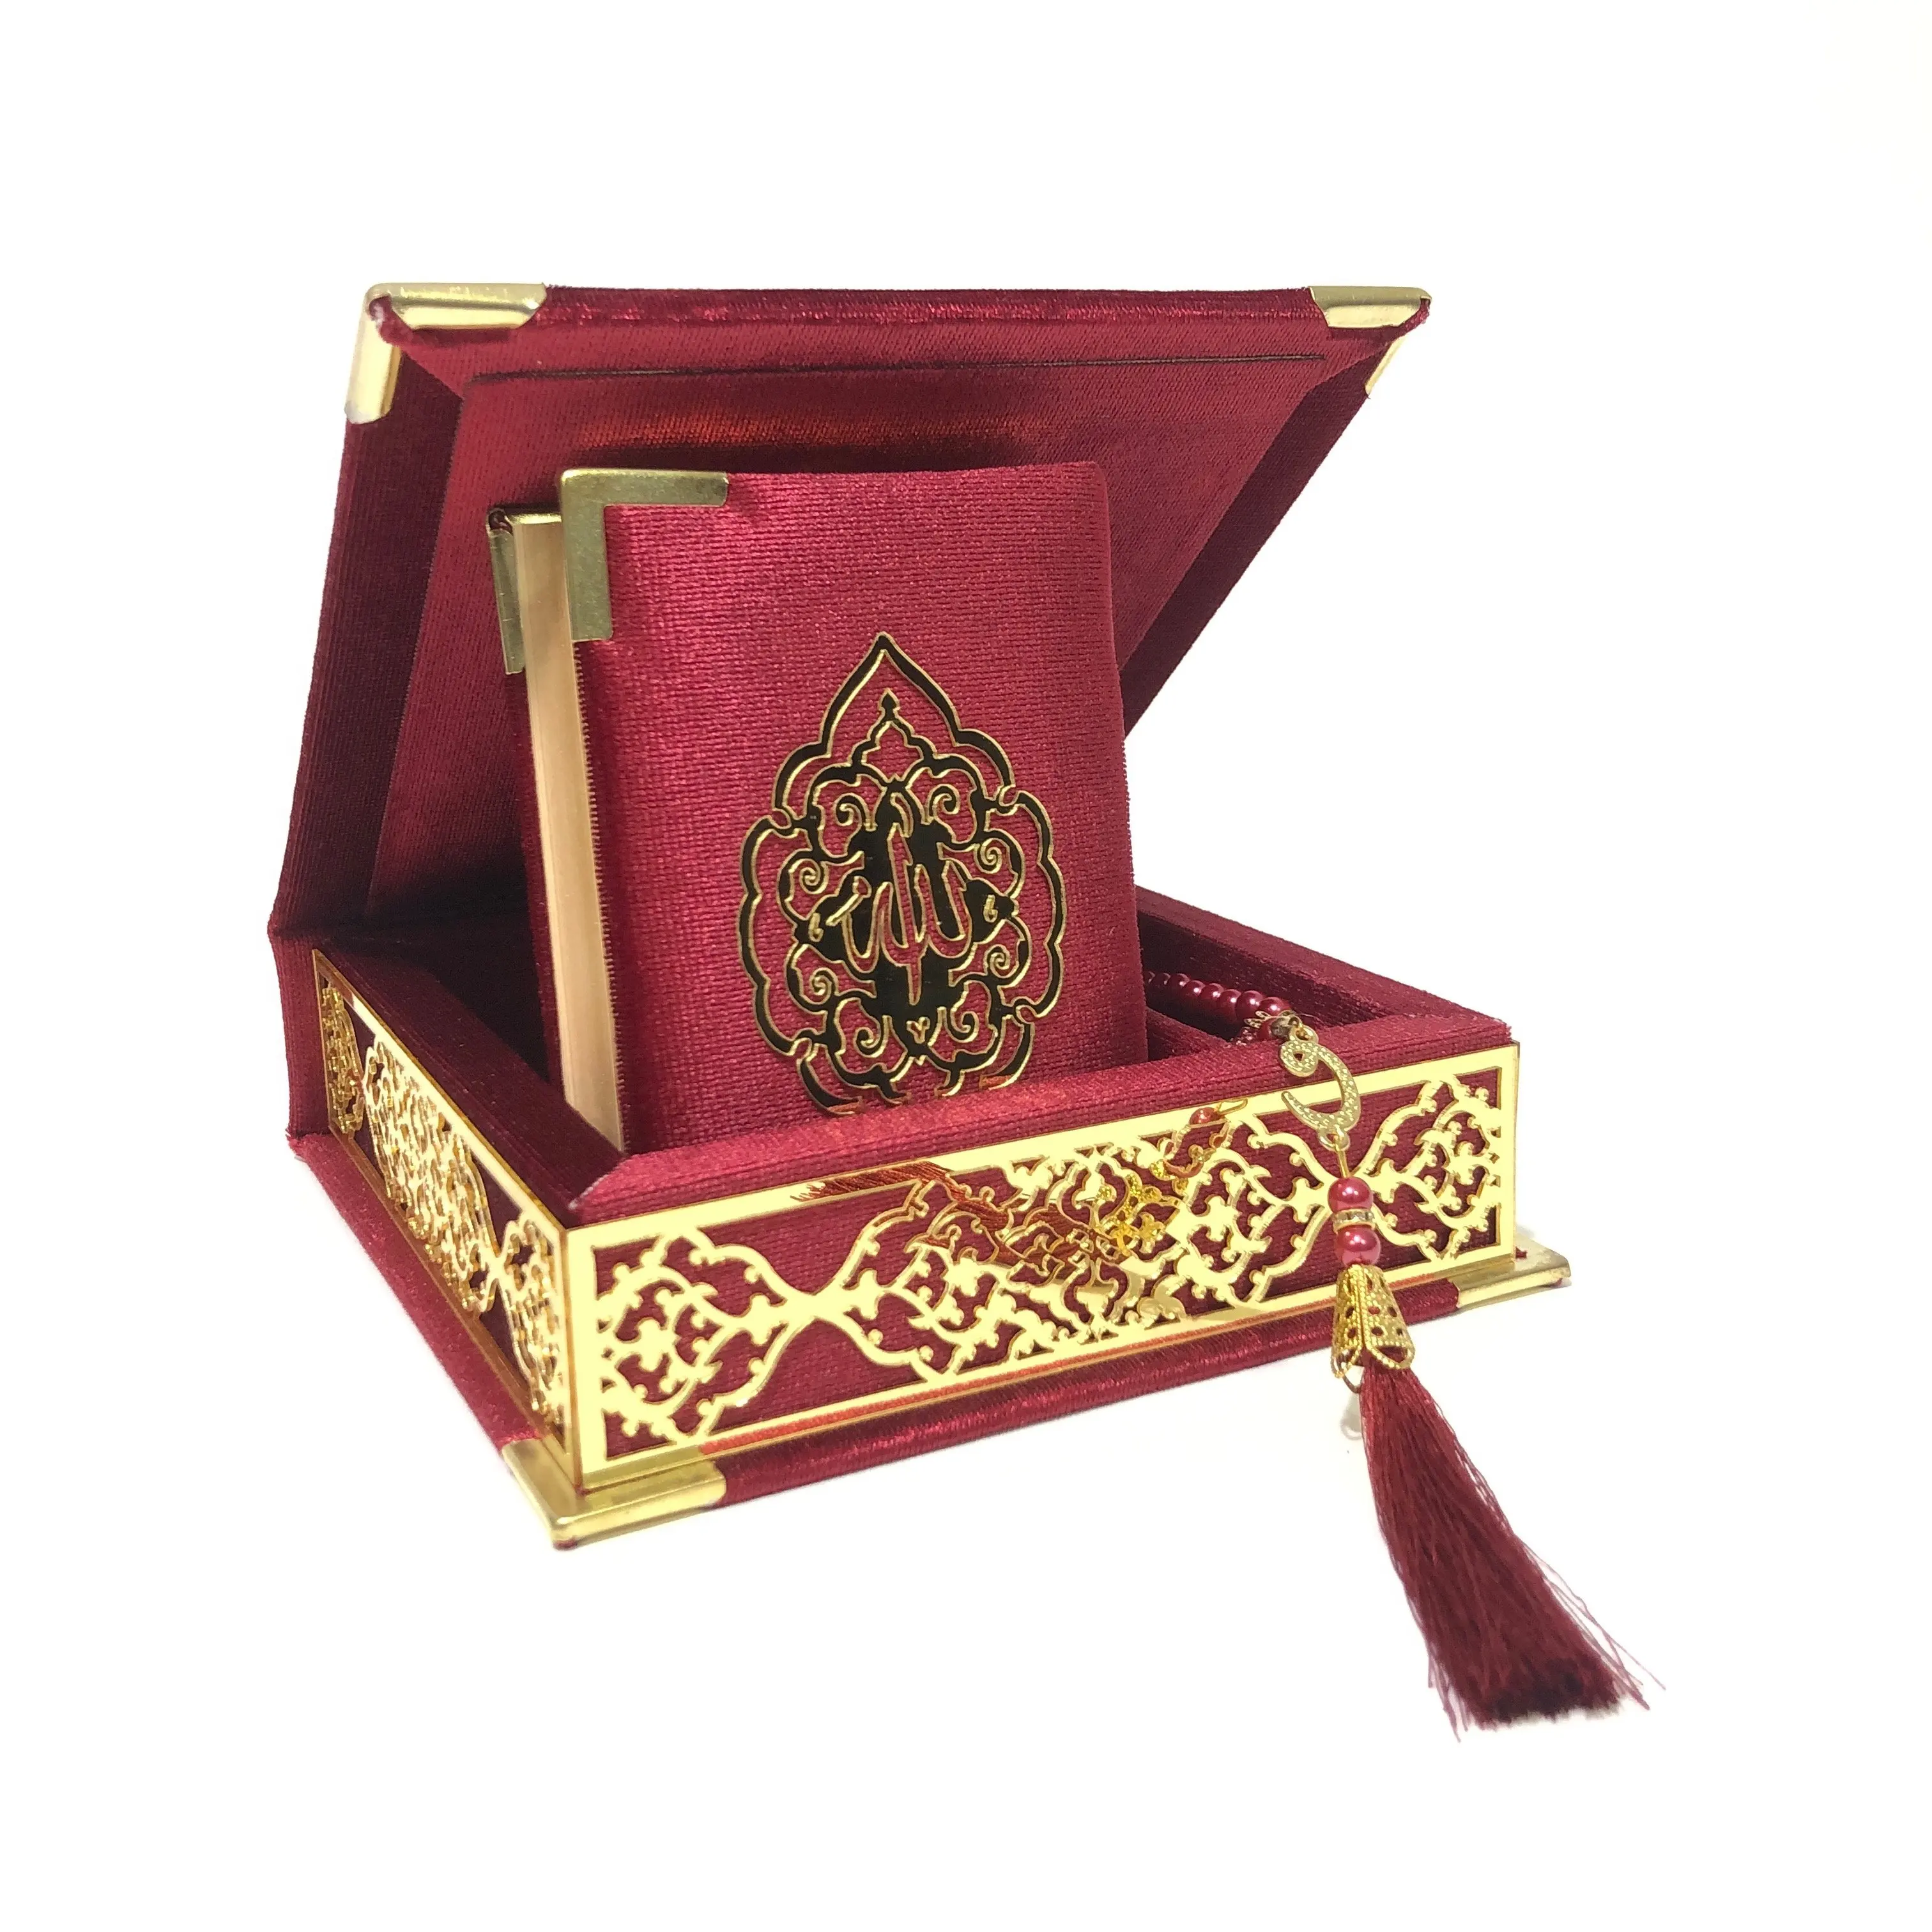 GREAT GIFT 16*16 Cm Ottoman Quran Set Claret Red (Gold Accessory)   FREE SHİPPİNG